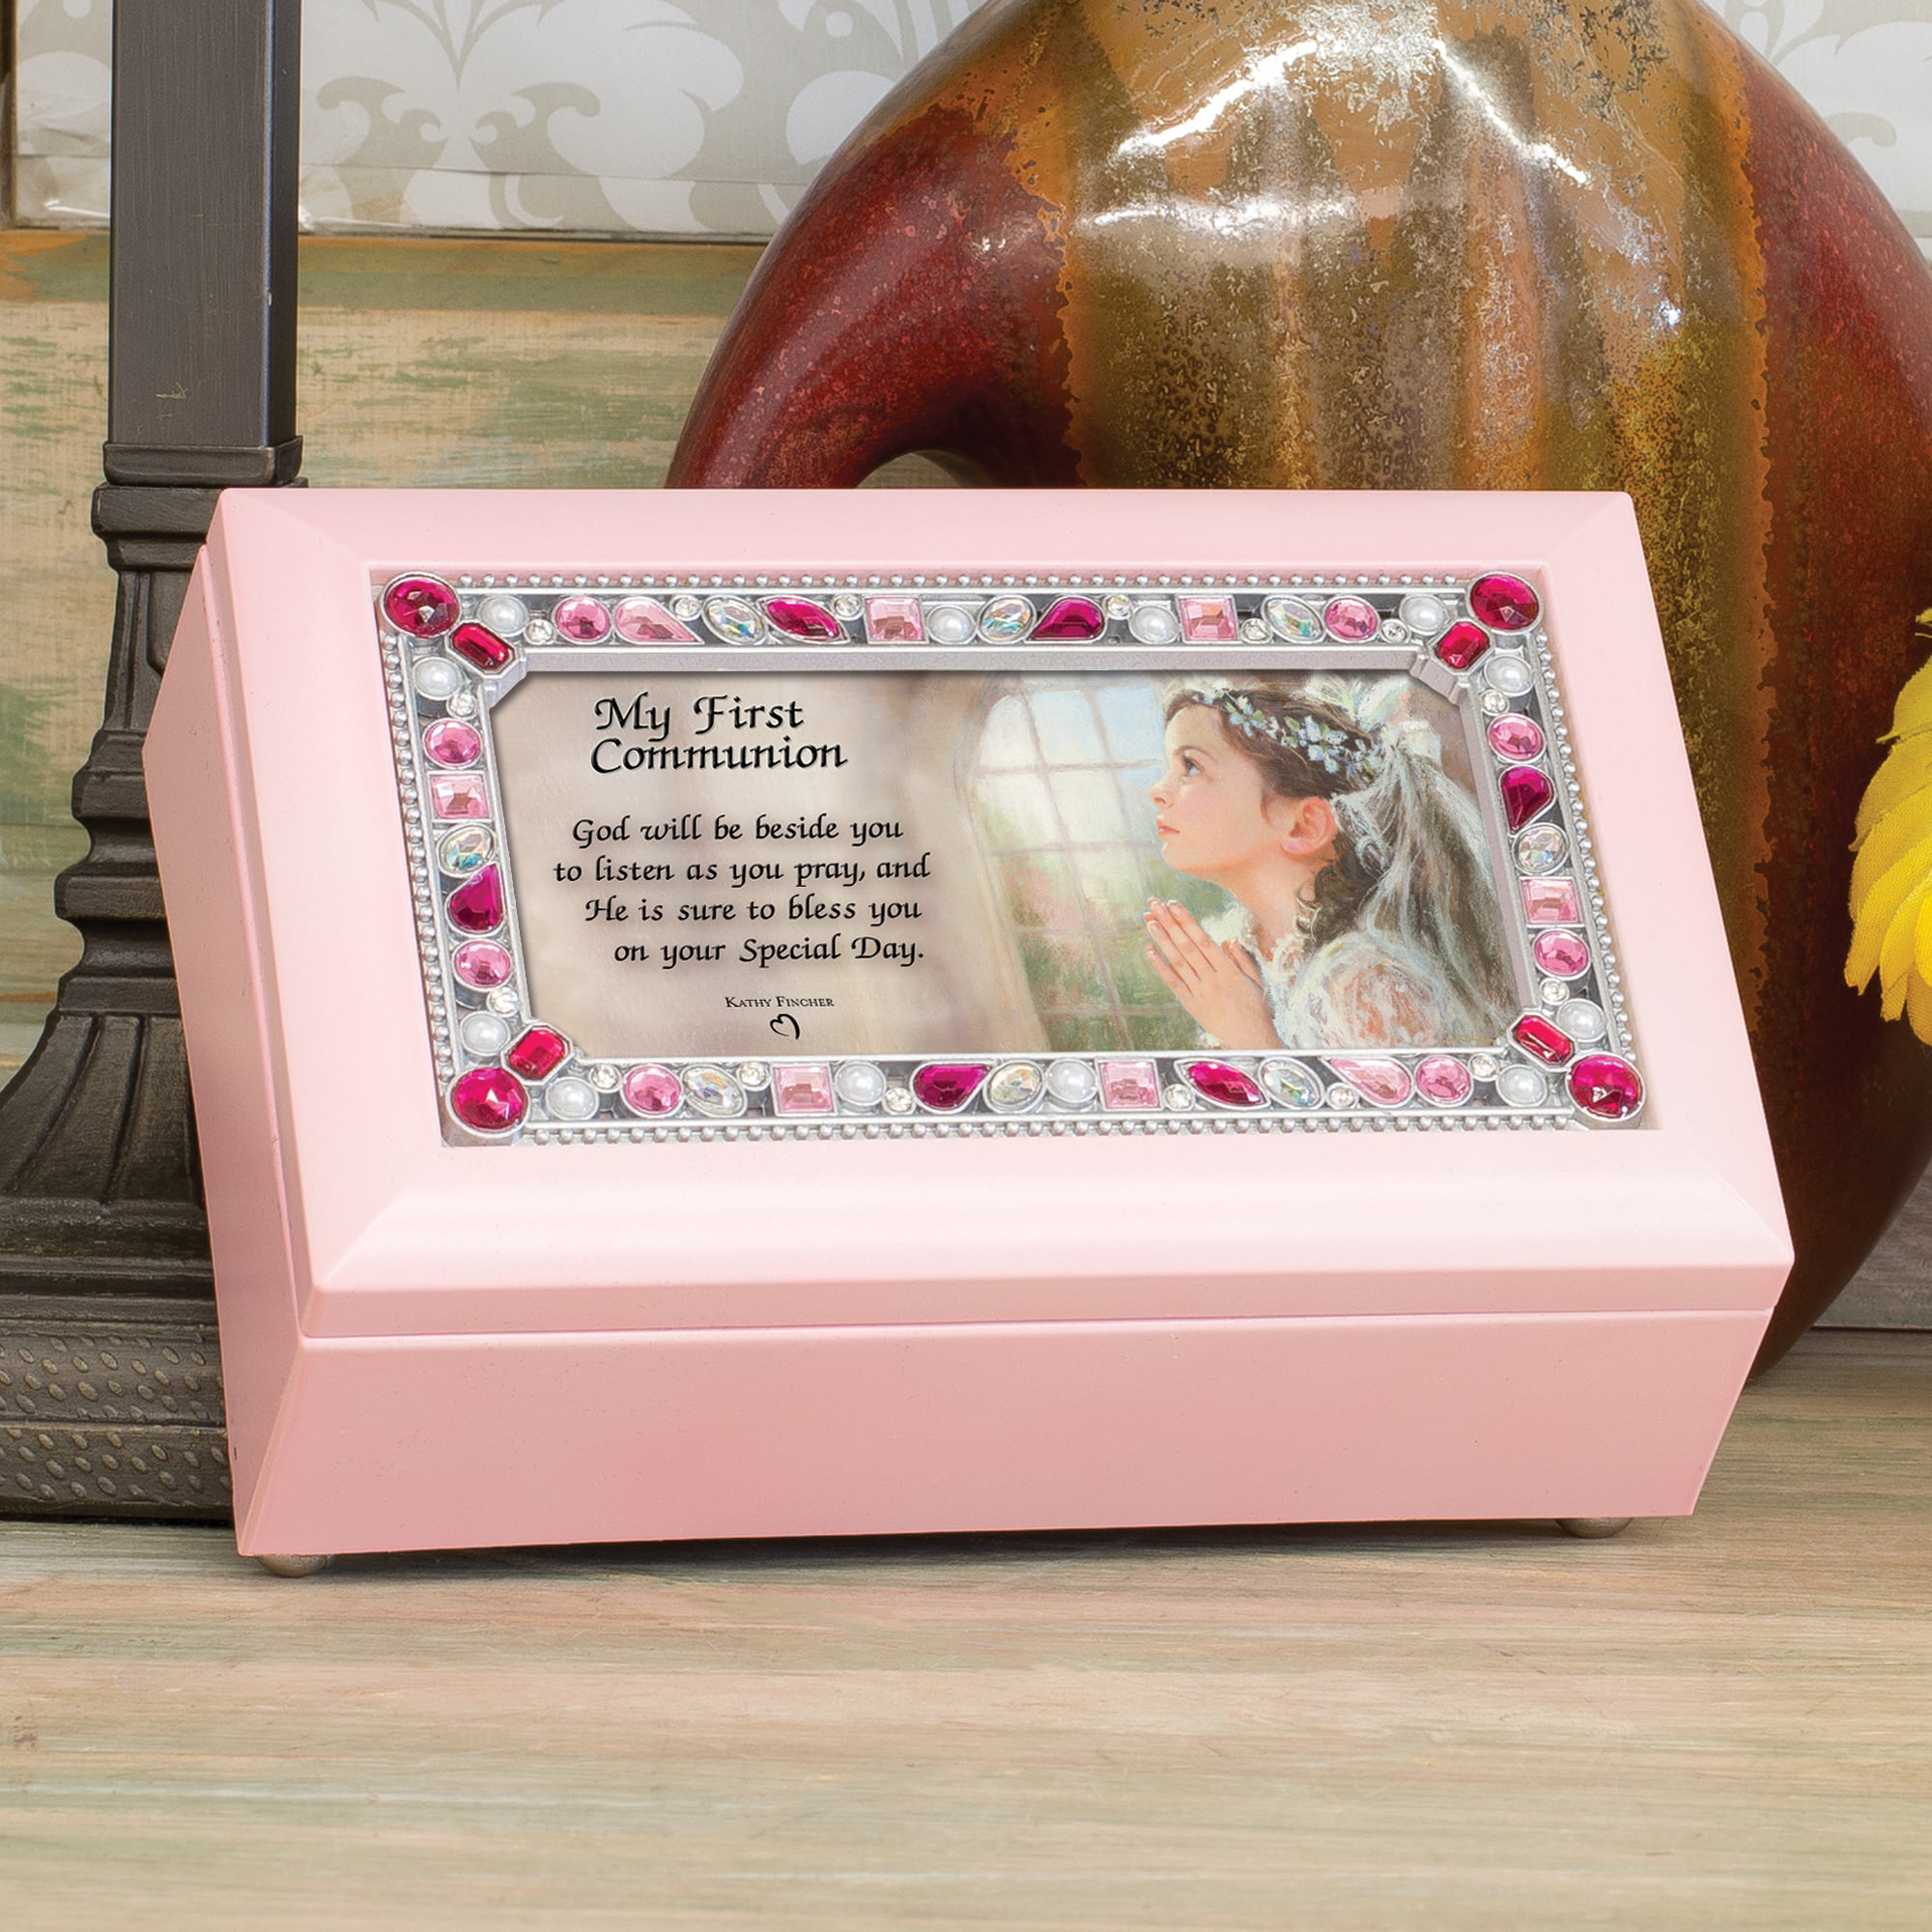 My First Communion Girl Brushed Silver Jeweled Inlay Jewelry Music Box Plays You Light Up My Life Cottage Garden 6166429